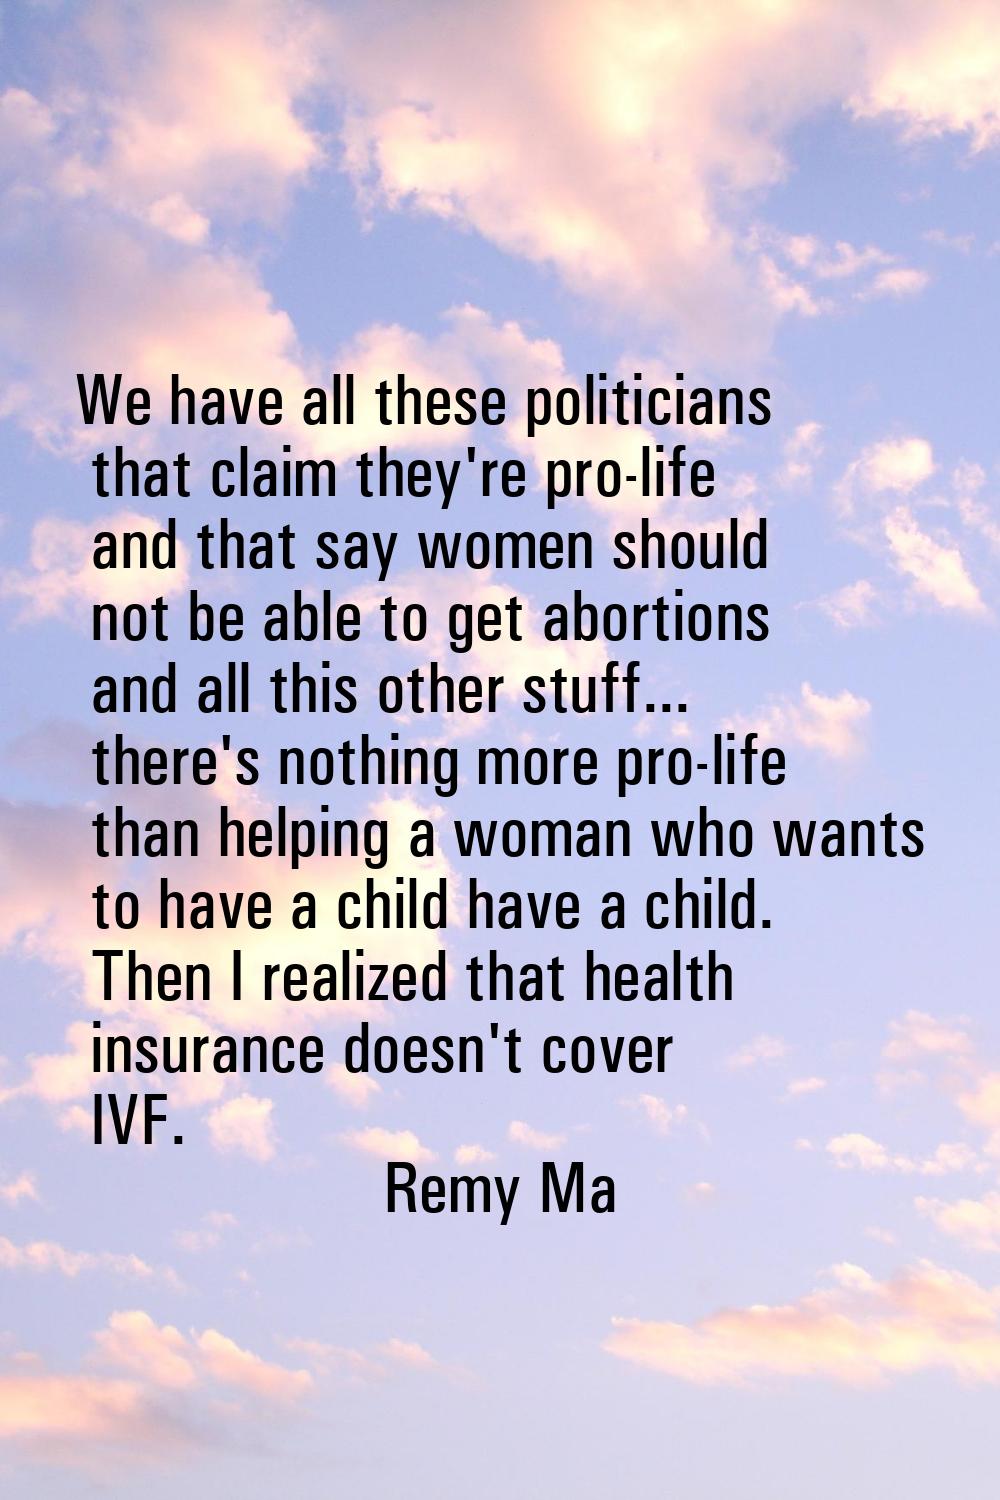 We have all these politicians that claim they're pro-life and that say women should not be able to 